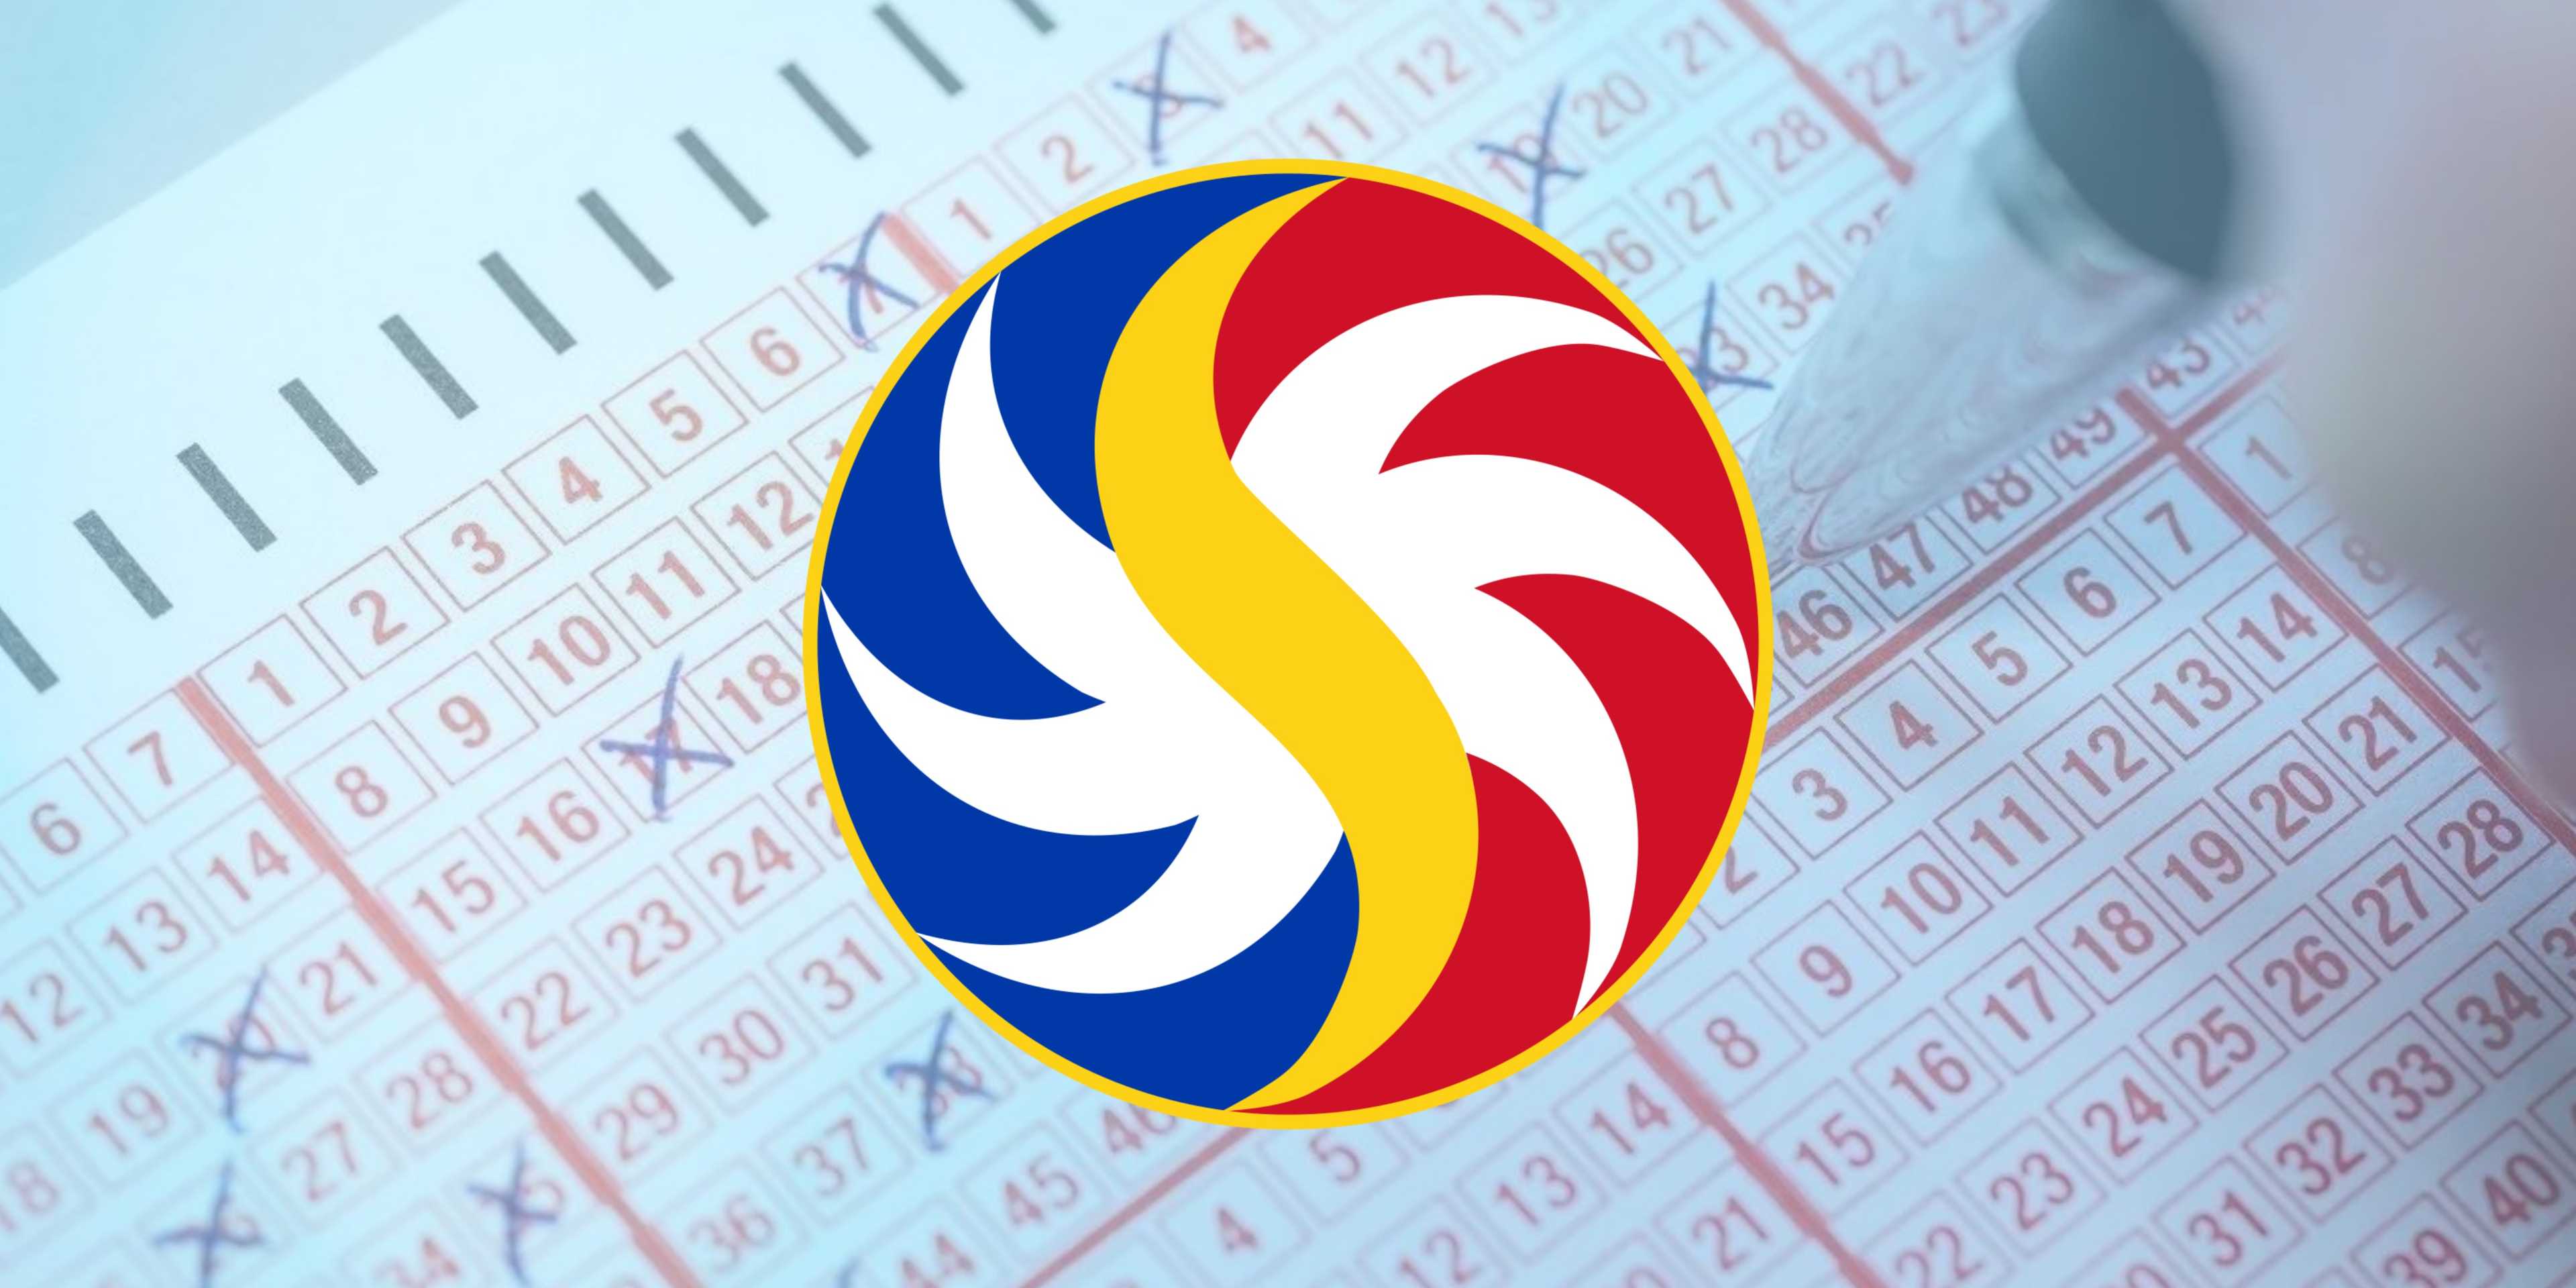 PCSO Lotto Draw Results on Thursday, February 22